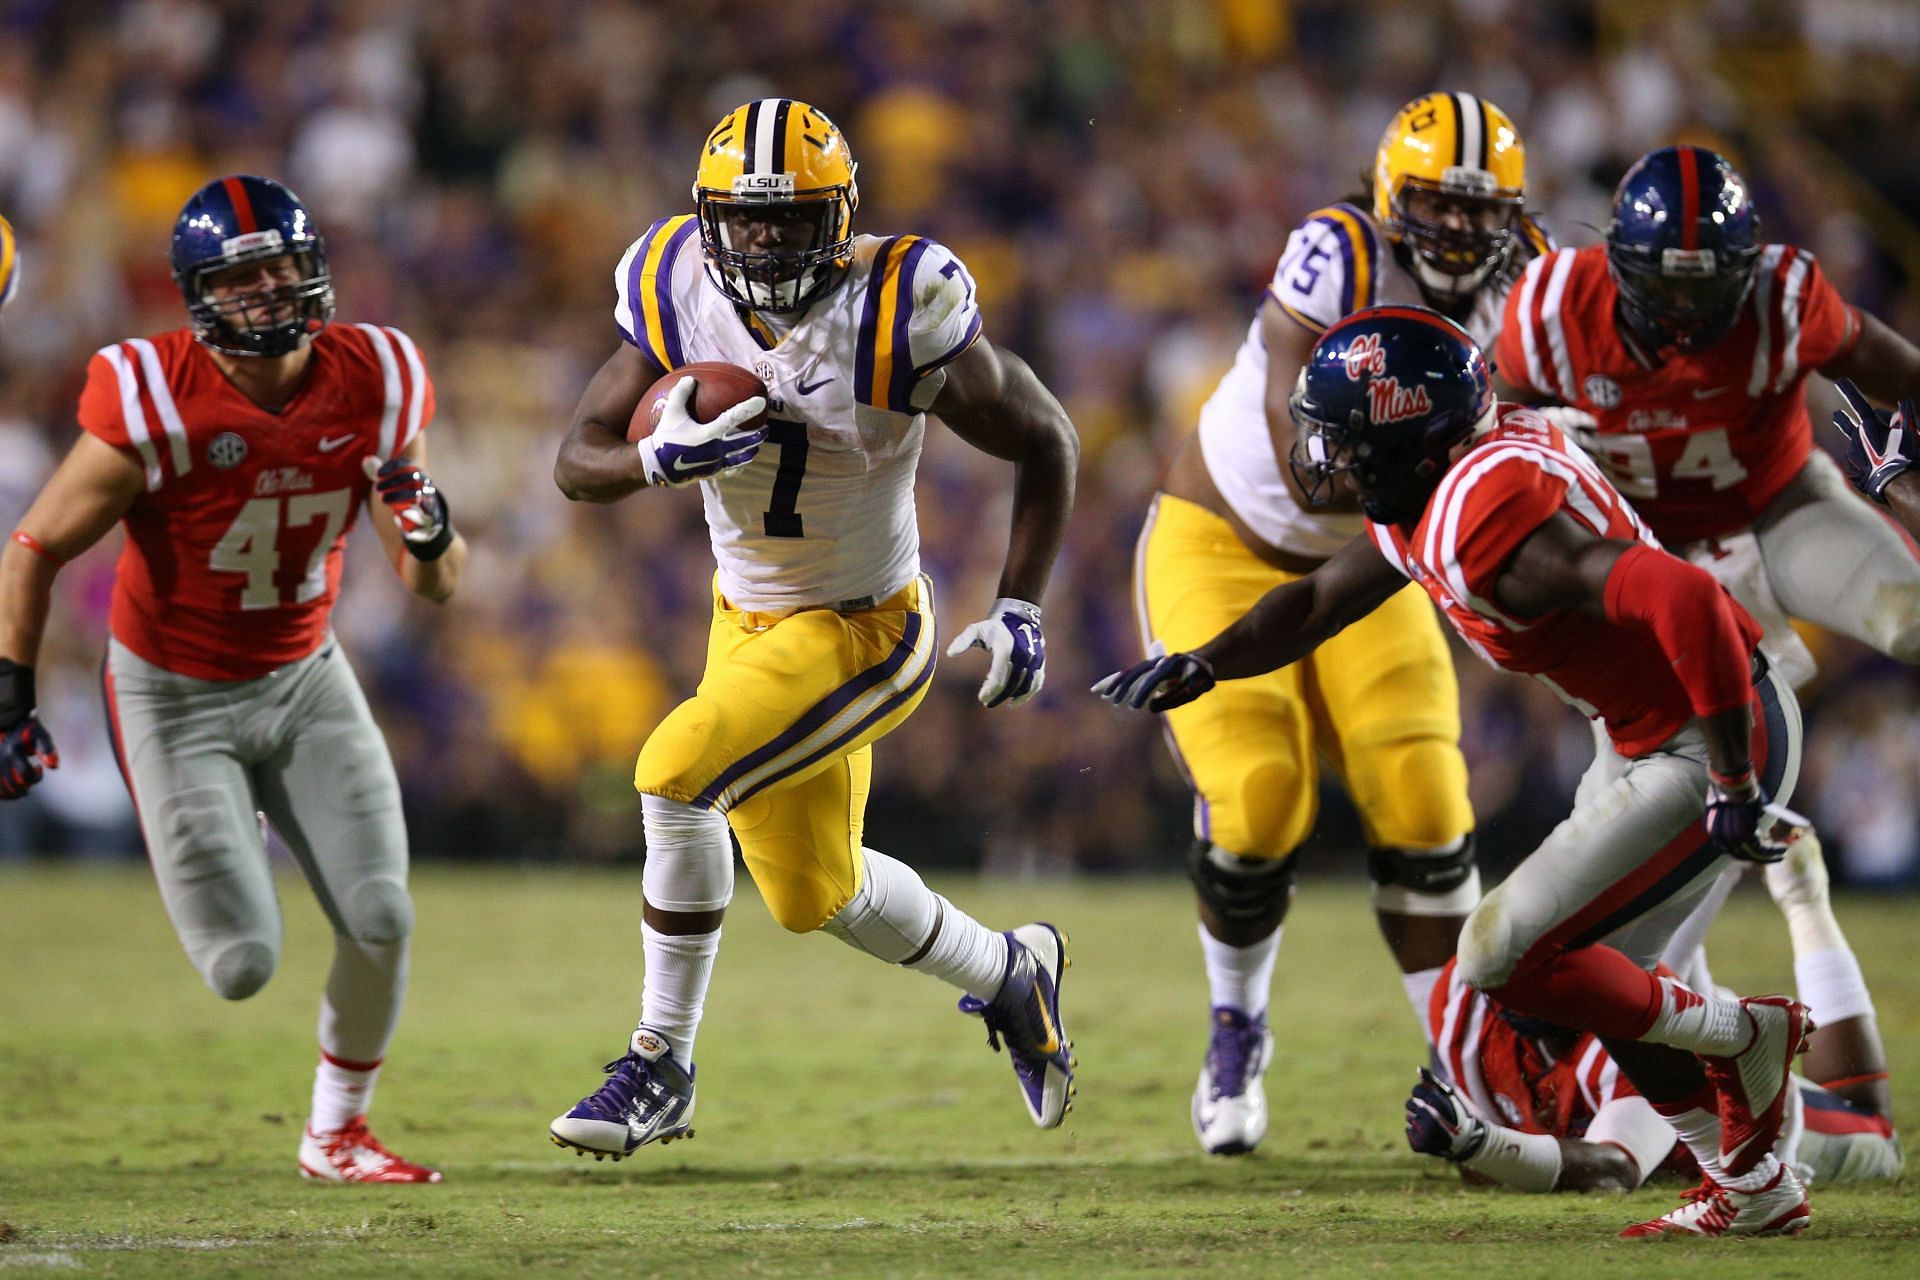 Mississippi v LSU Mississippi v LSU BATON ROUGE, LA - OCTOBER 25: Leonard Fournette #7 of the LSU Tigers runs the ball against the Mississippi Rebels at Tiger Stadium on October 25, 2014, in Baton Rouge, Louisiana. (Photo by Chris Graythen/Getty Images)